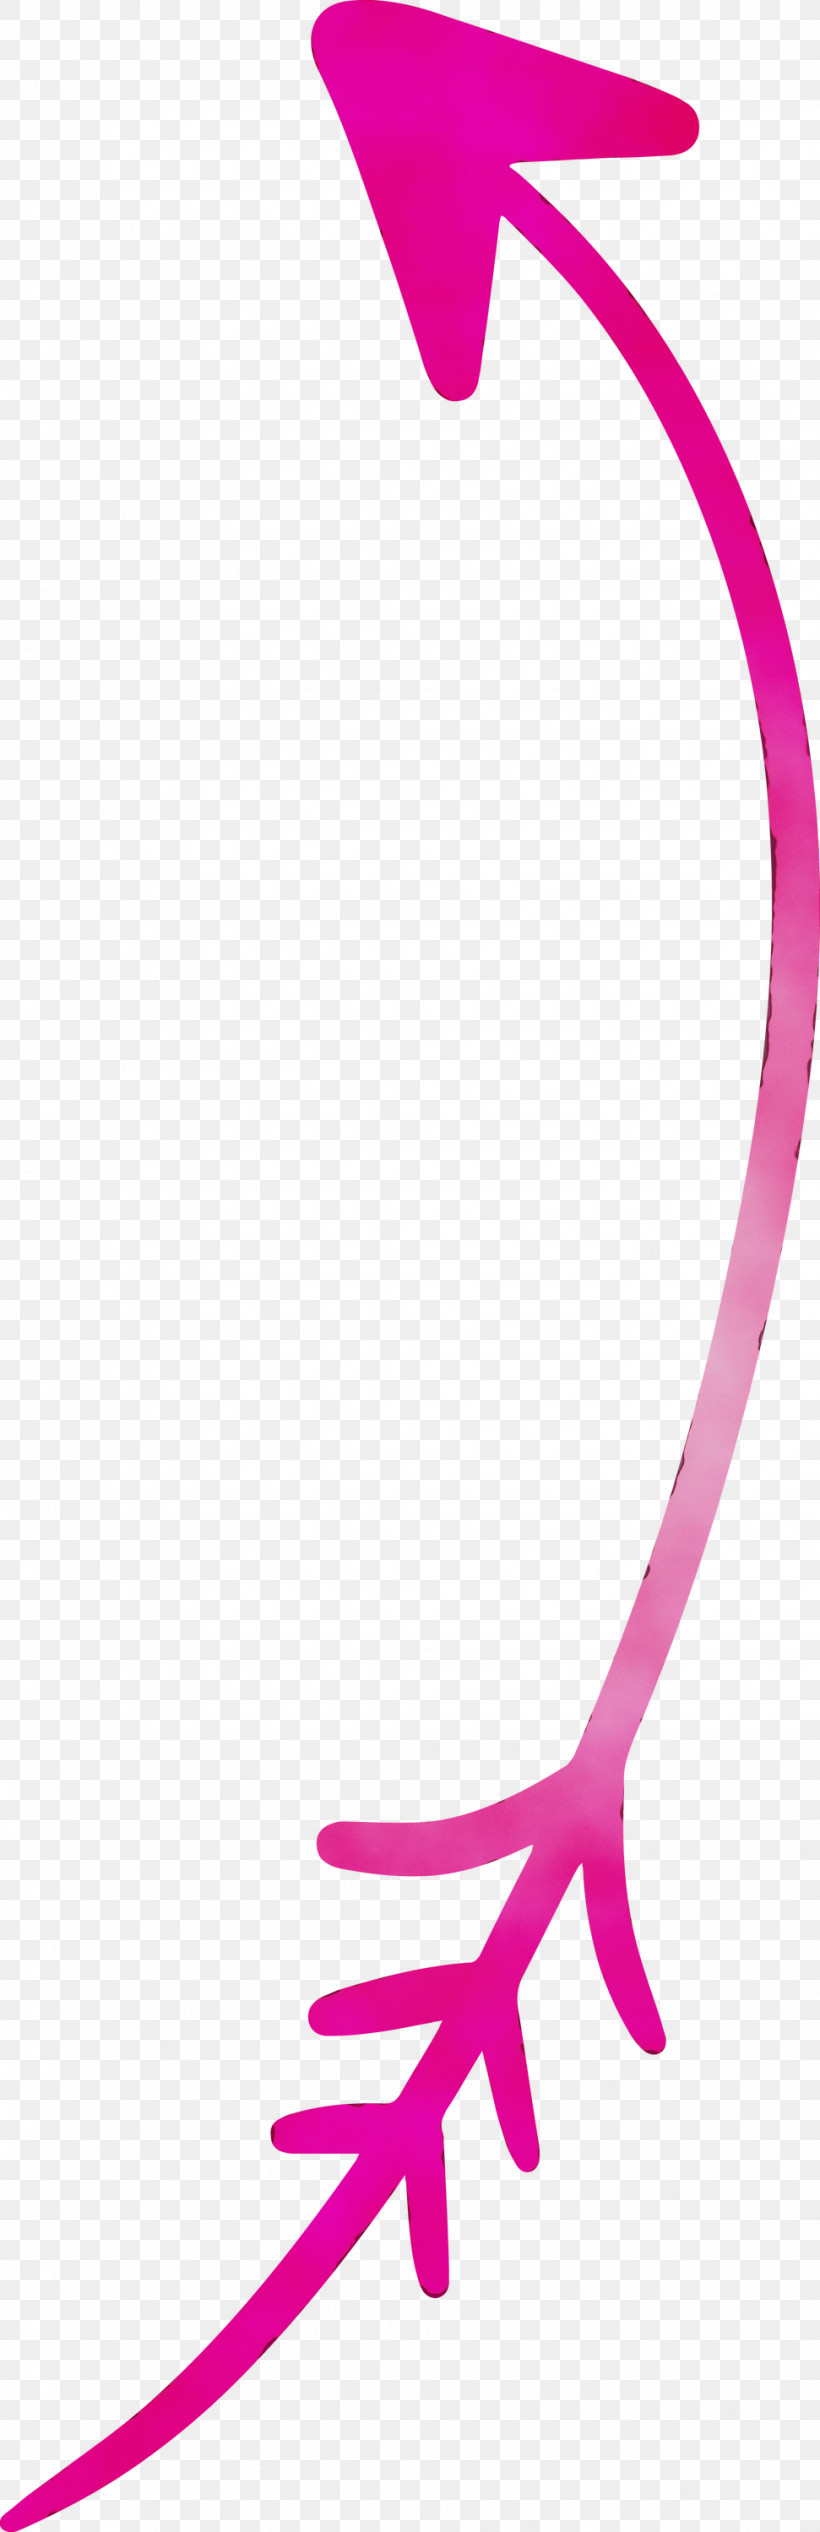 Pink Magenta Line Material Property, PNG, 971x2999px, Simple Arrow, Heart Arrow, Line, Magenta, Material Property Download Free